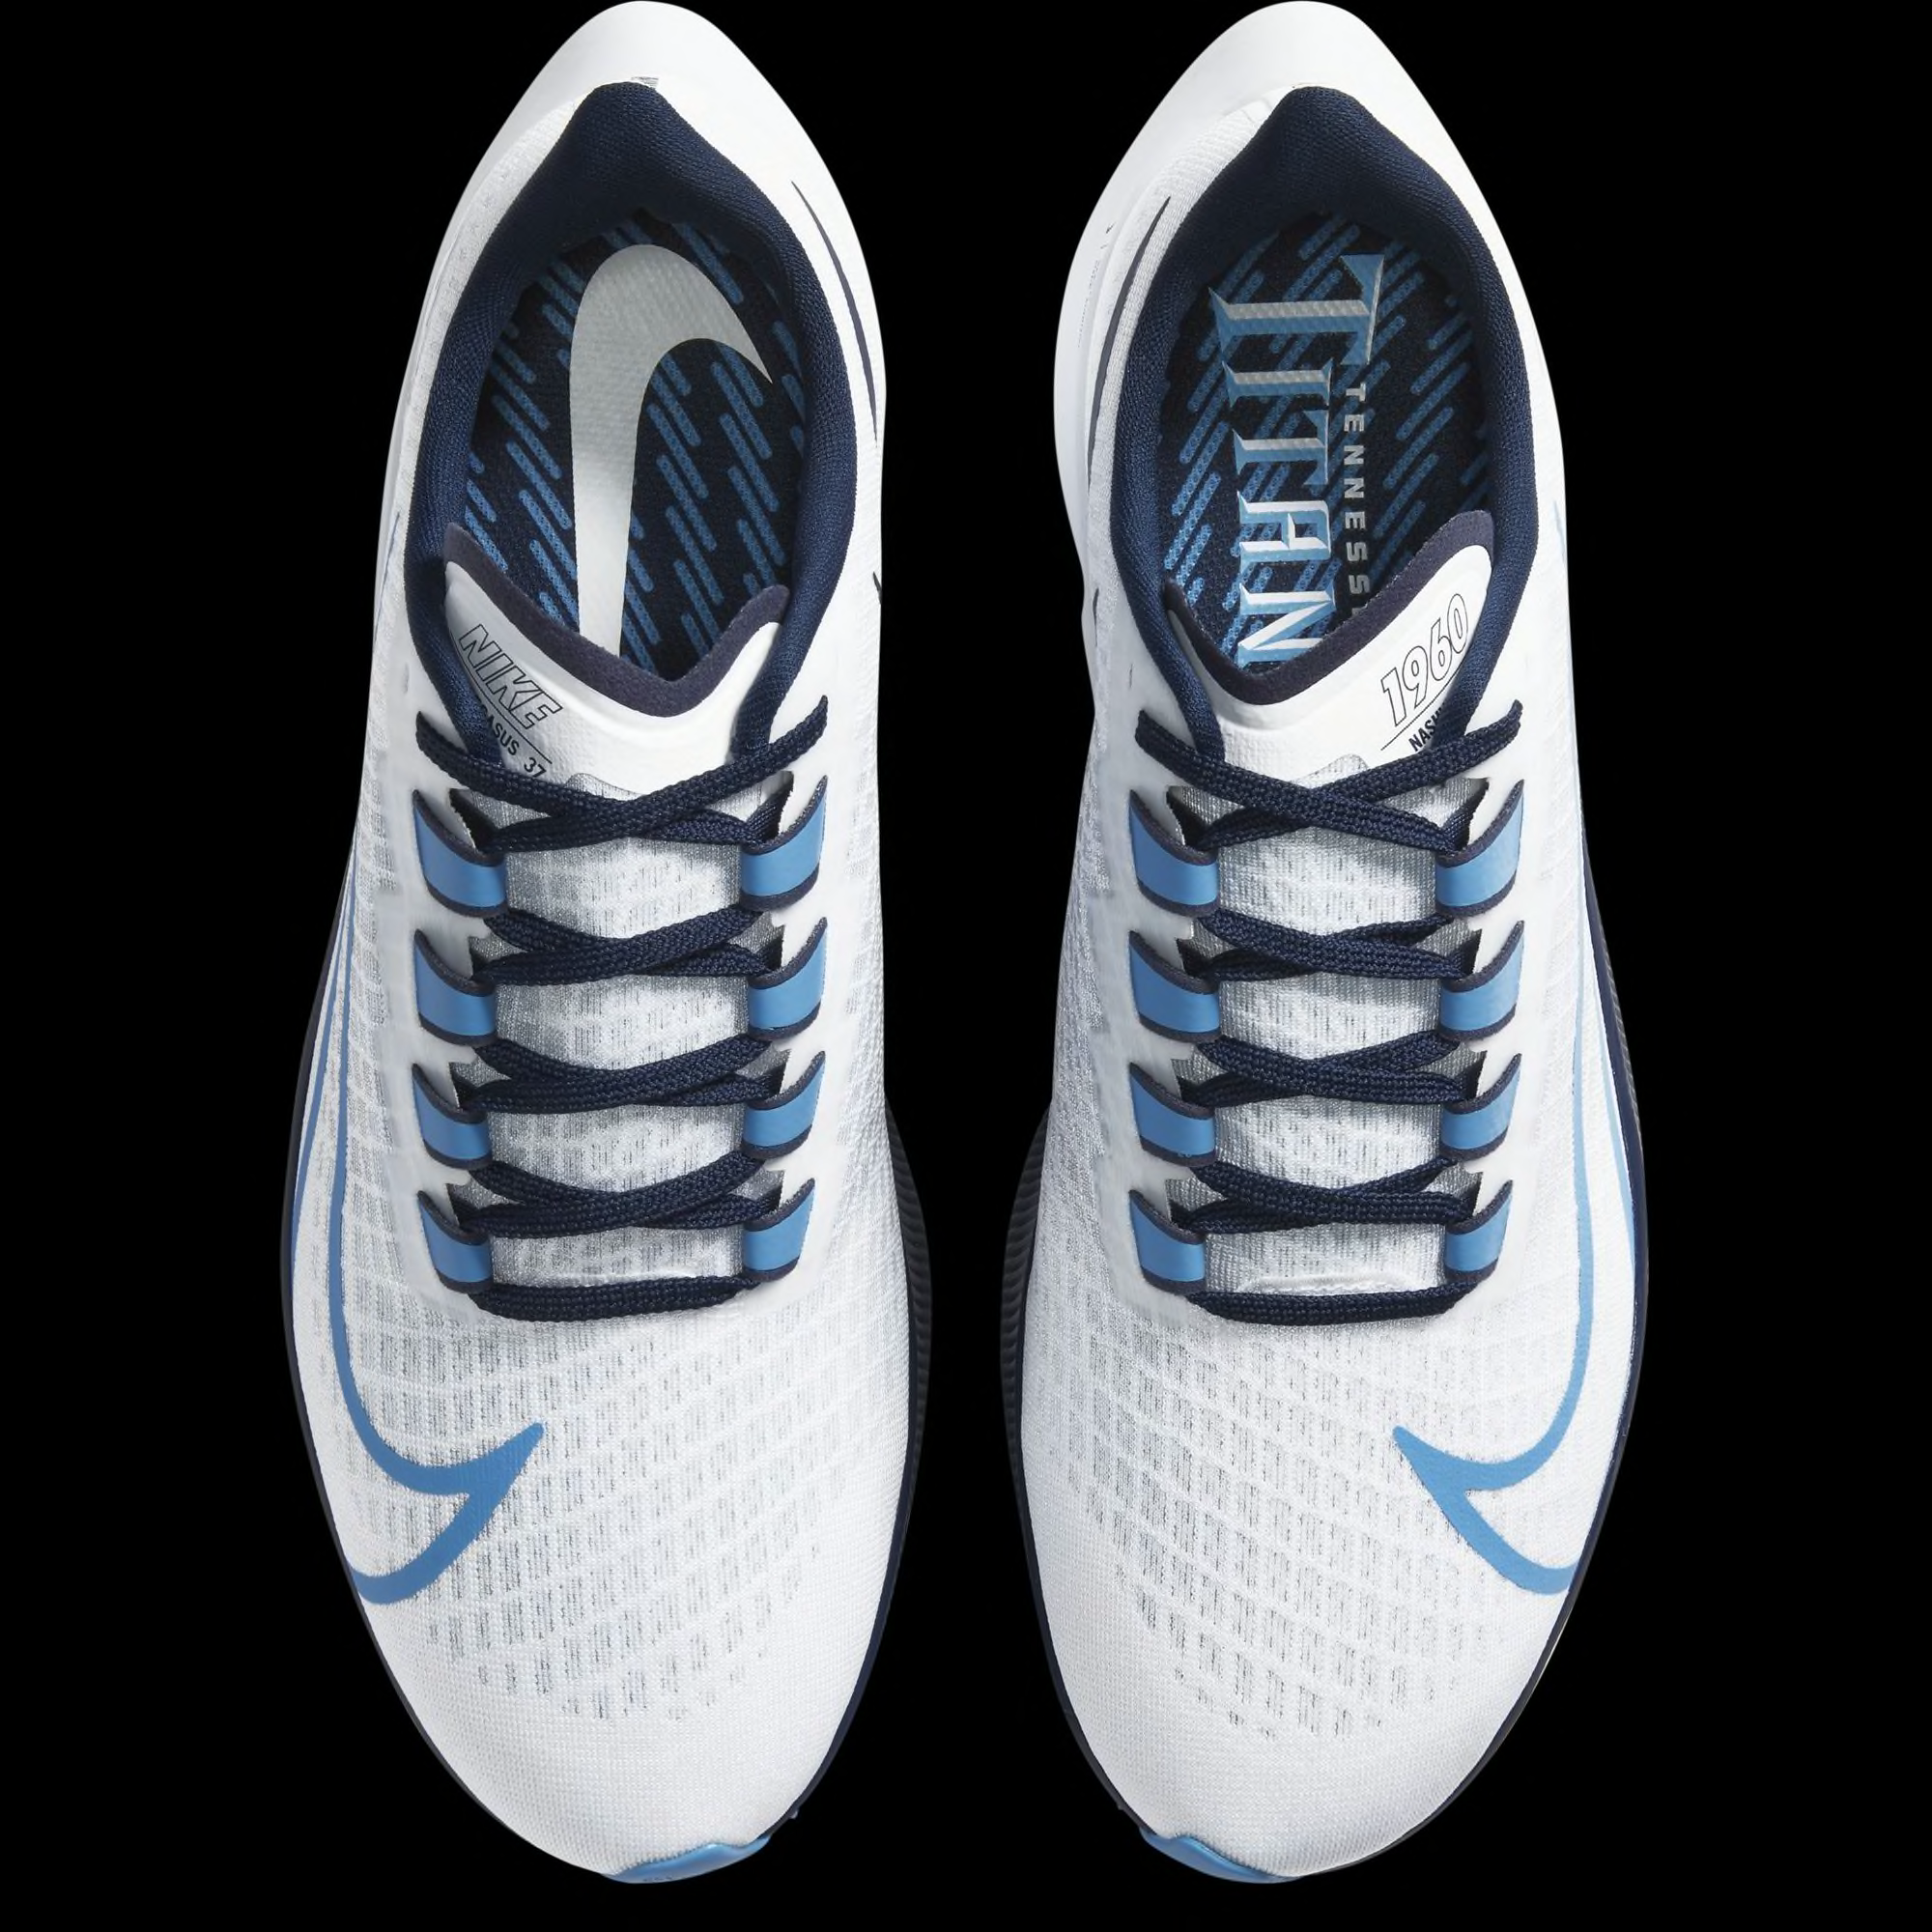 These new Tennessee Titans Nikes awesome shoes